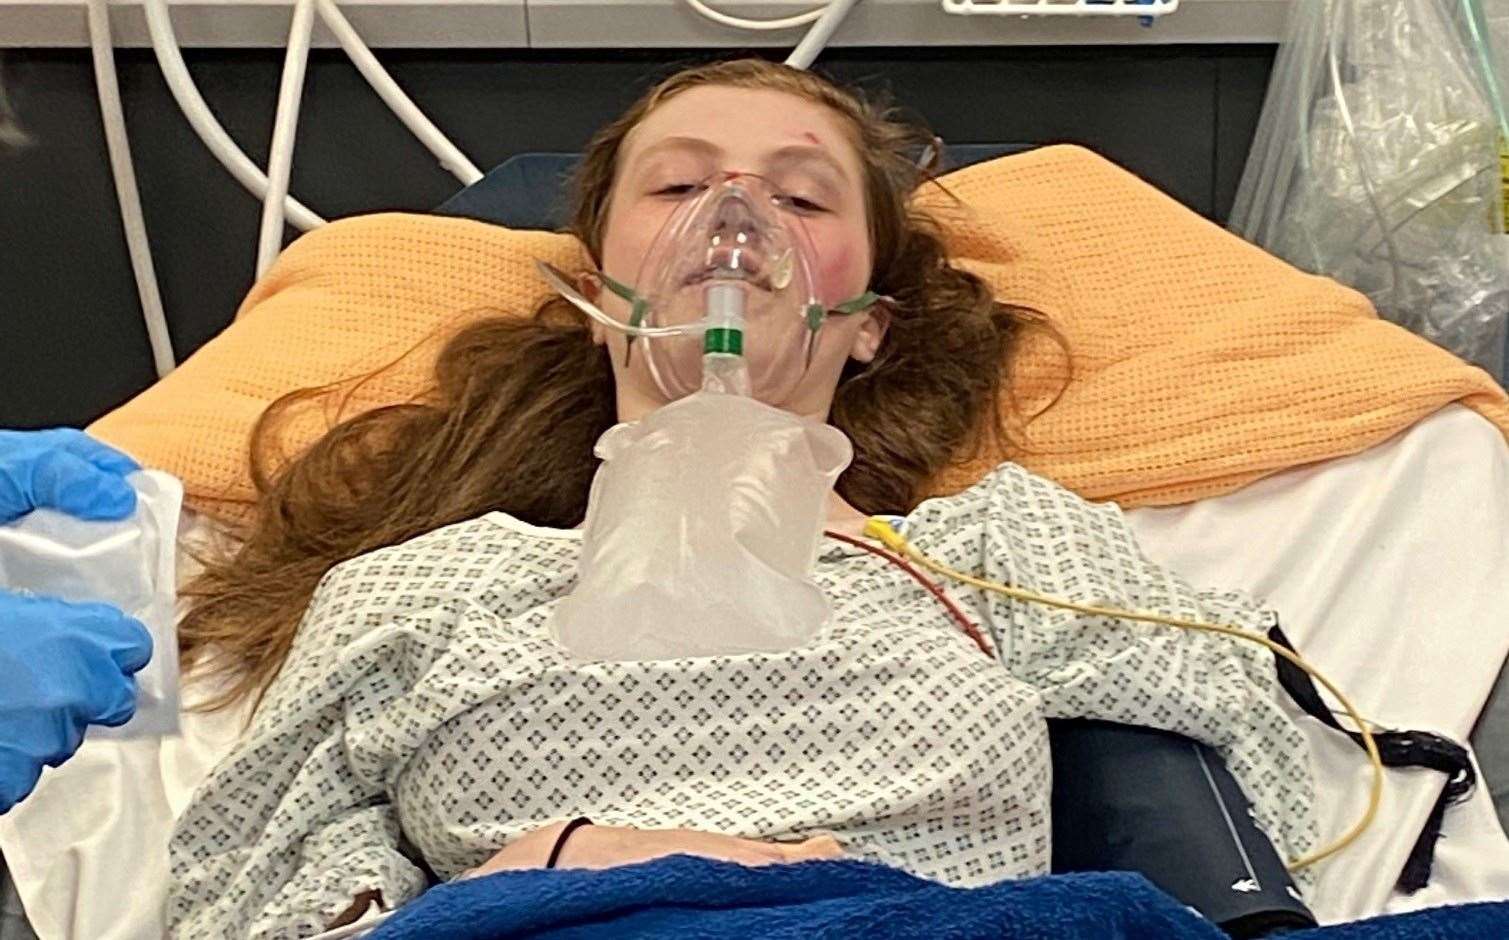 Maya McFadden, 11, was badly injured after being hit by a car on Canterbury Road in Densole, near Folkestone, when crossing the road from the bus stop. Picture: Sean McFadden